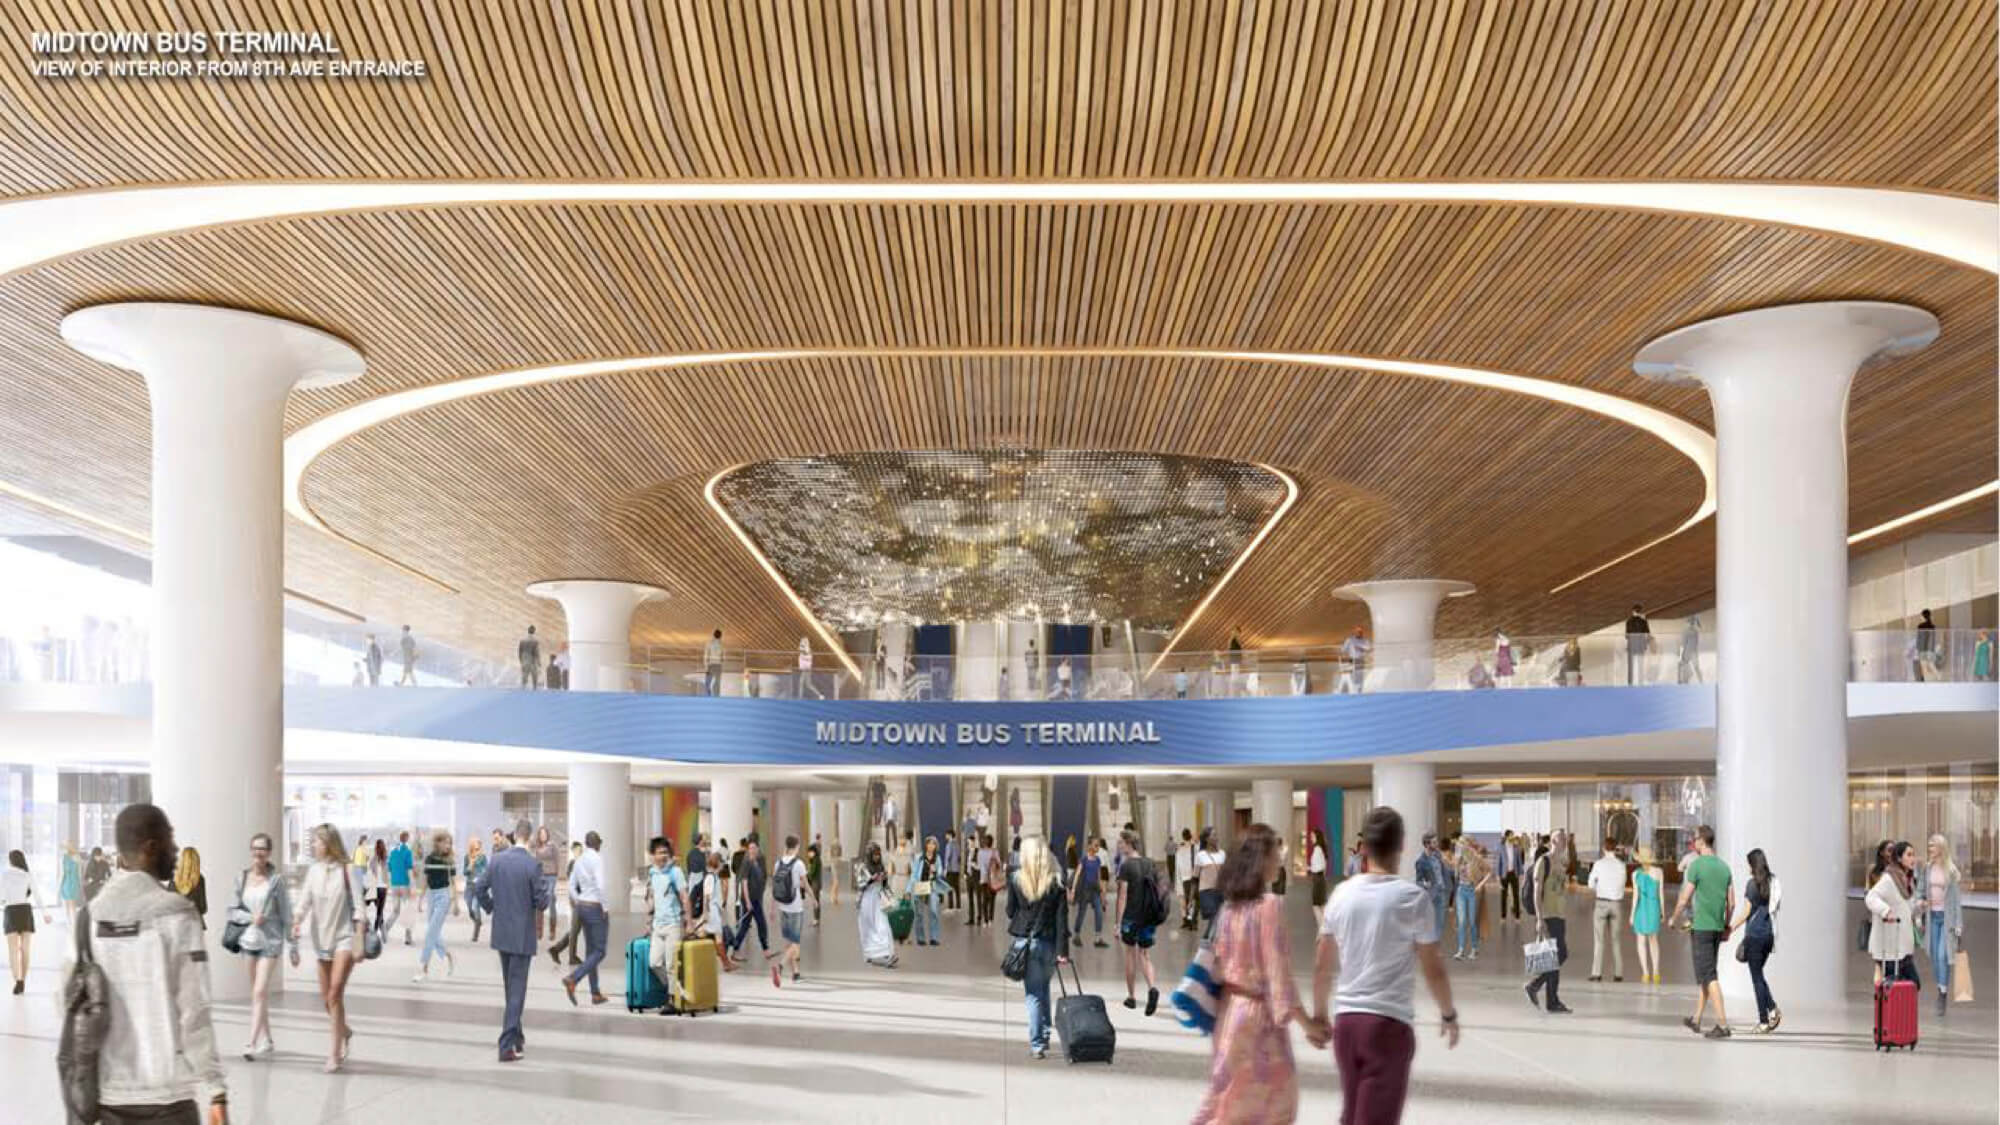 Port Authority taps big-time architects for $10 billion bus terminal revamp